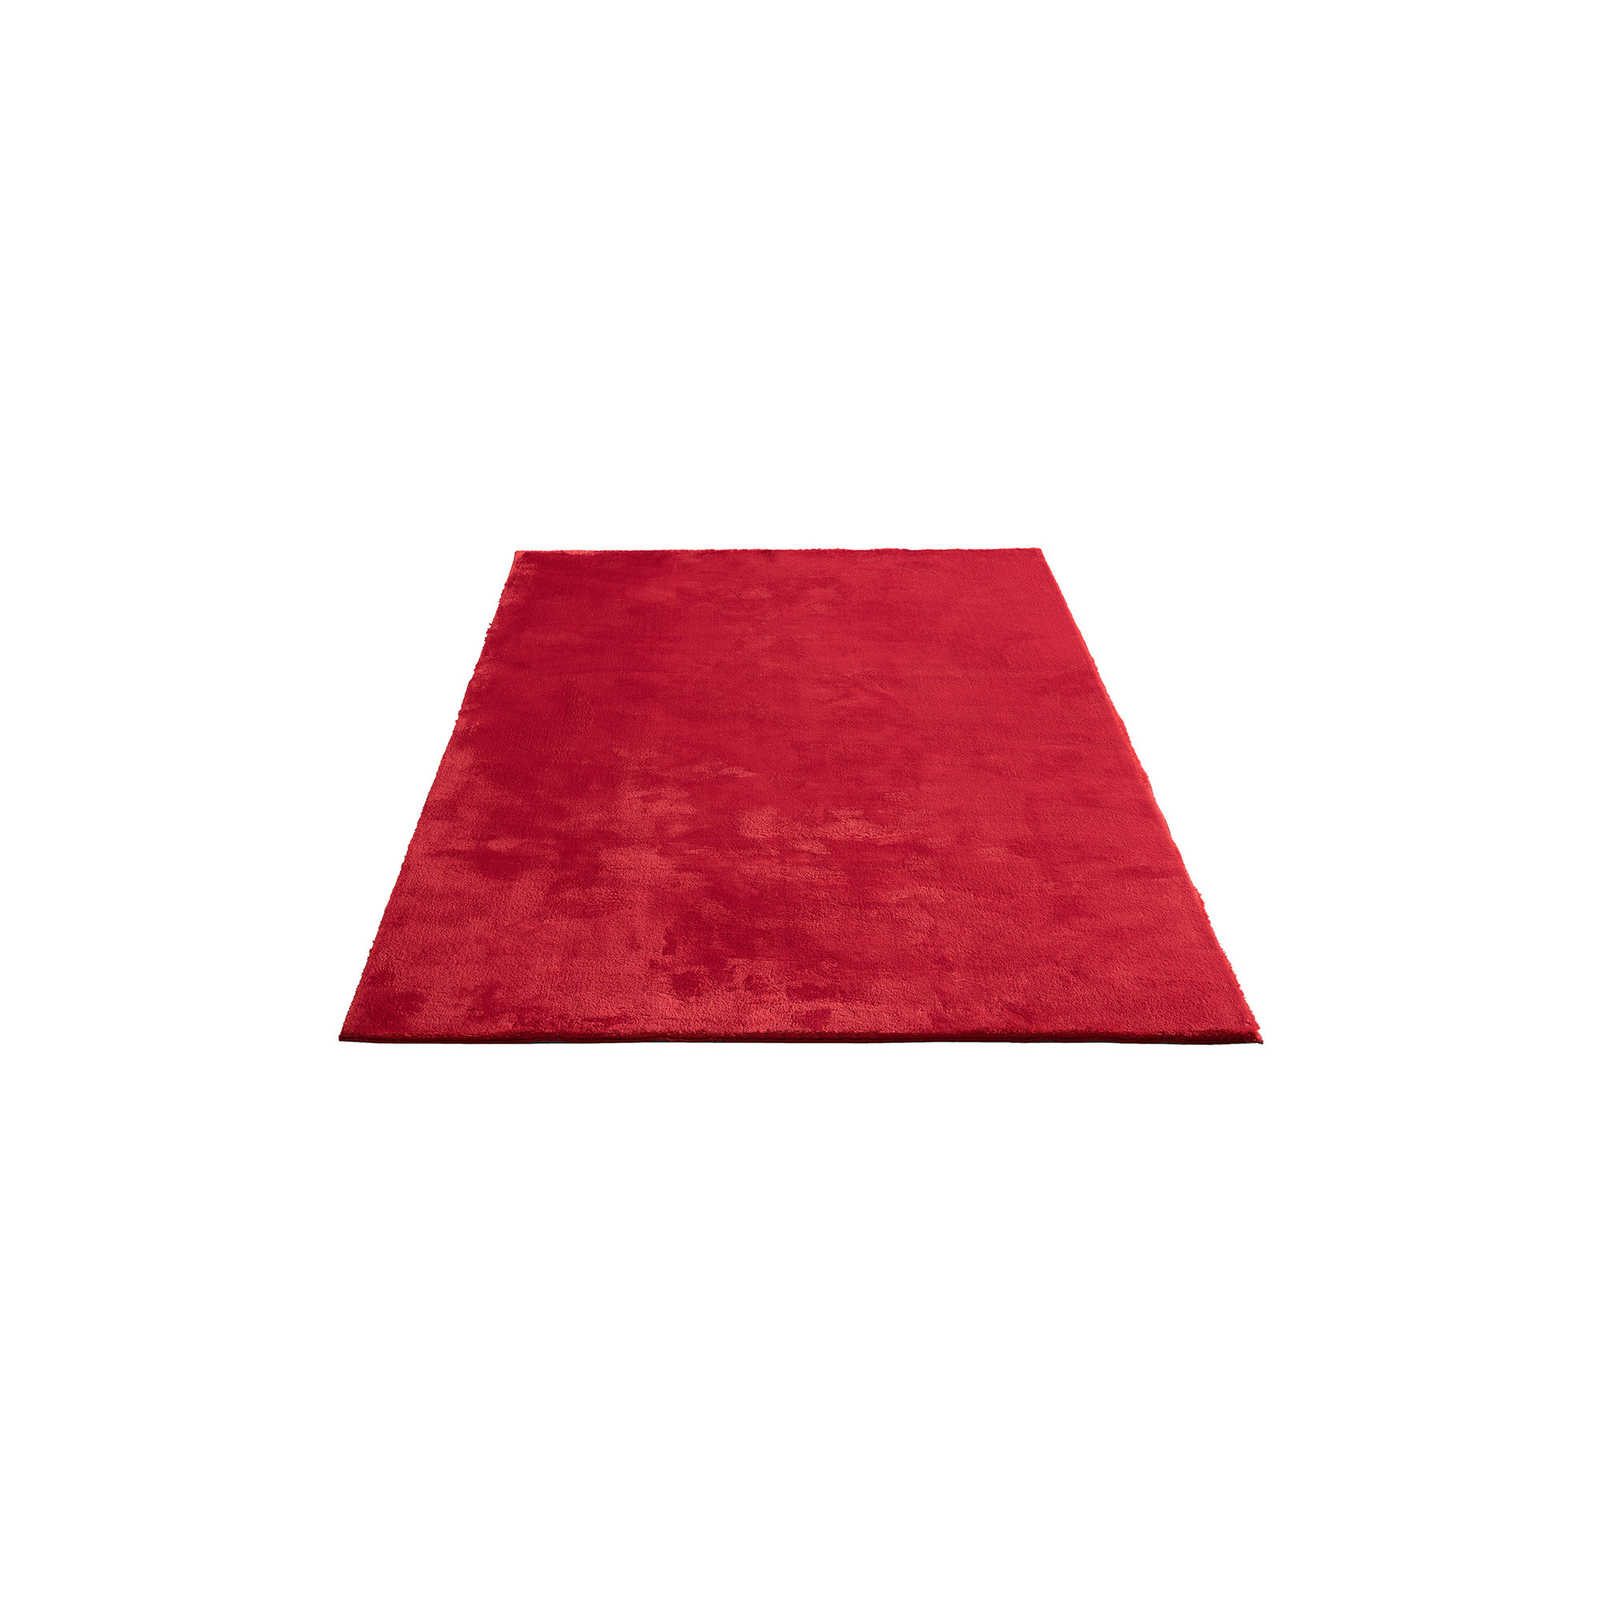 Extra soft high pile carpet in red - 170 x 120 cm
